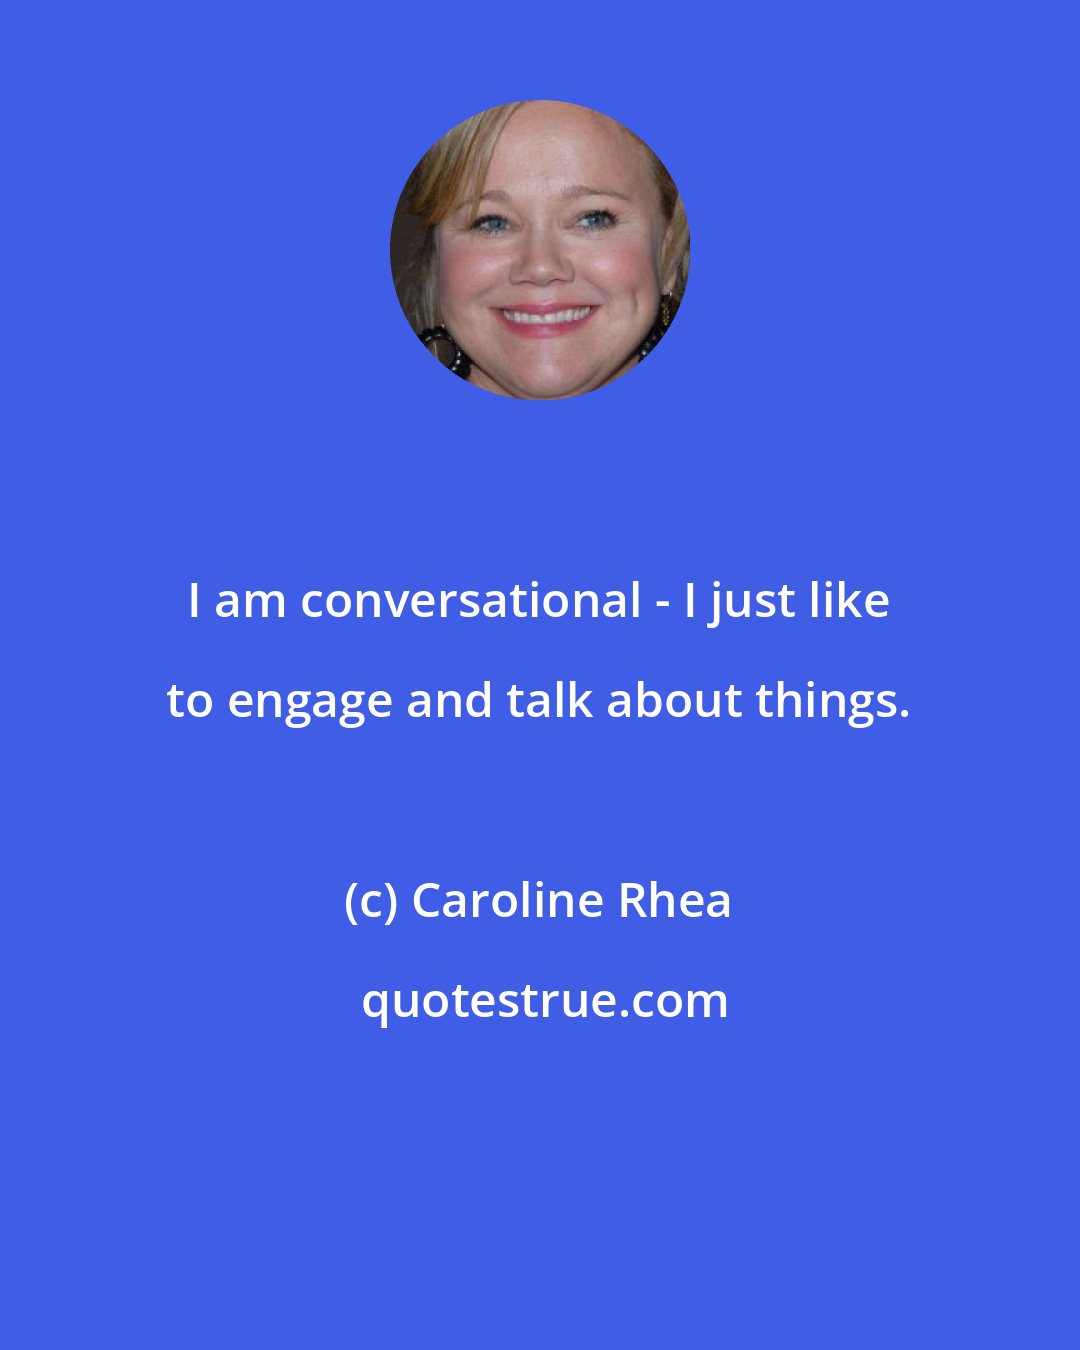 Caroline Rhea: I am conversational - I just like to engage and talk about things.